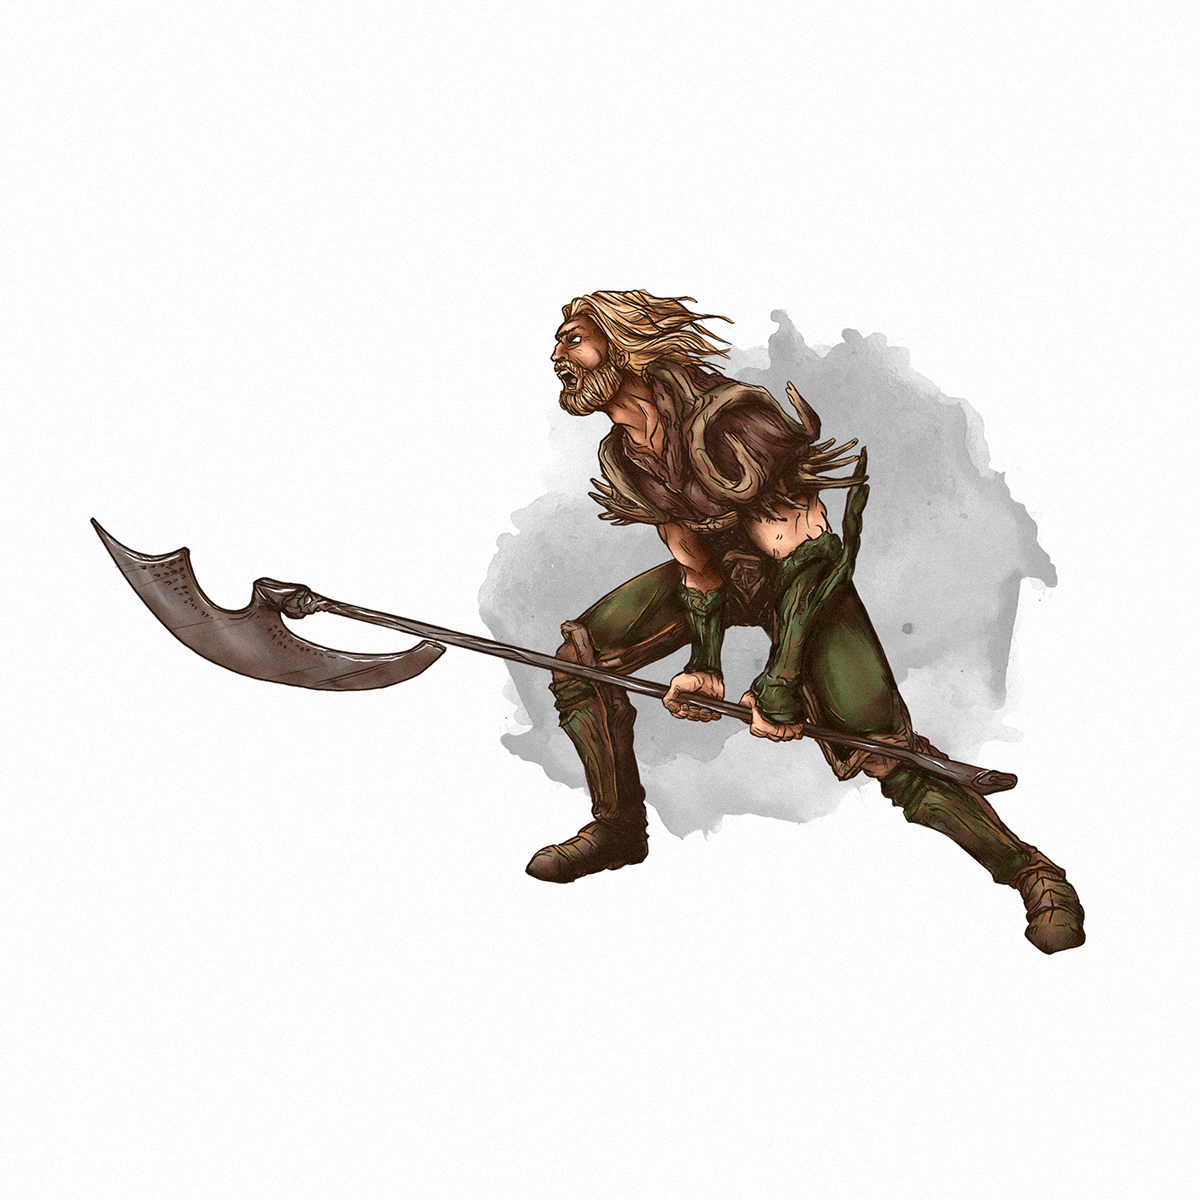 Barbarian Character Character design  ILLUSTRATION  knight medieval medieval design romain warrior